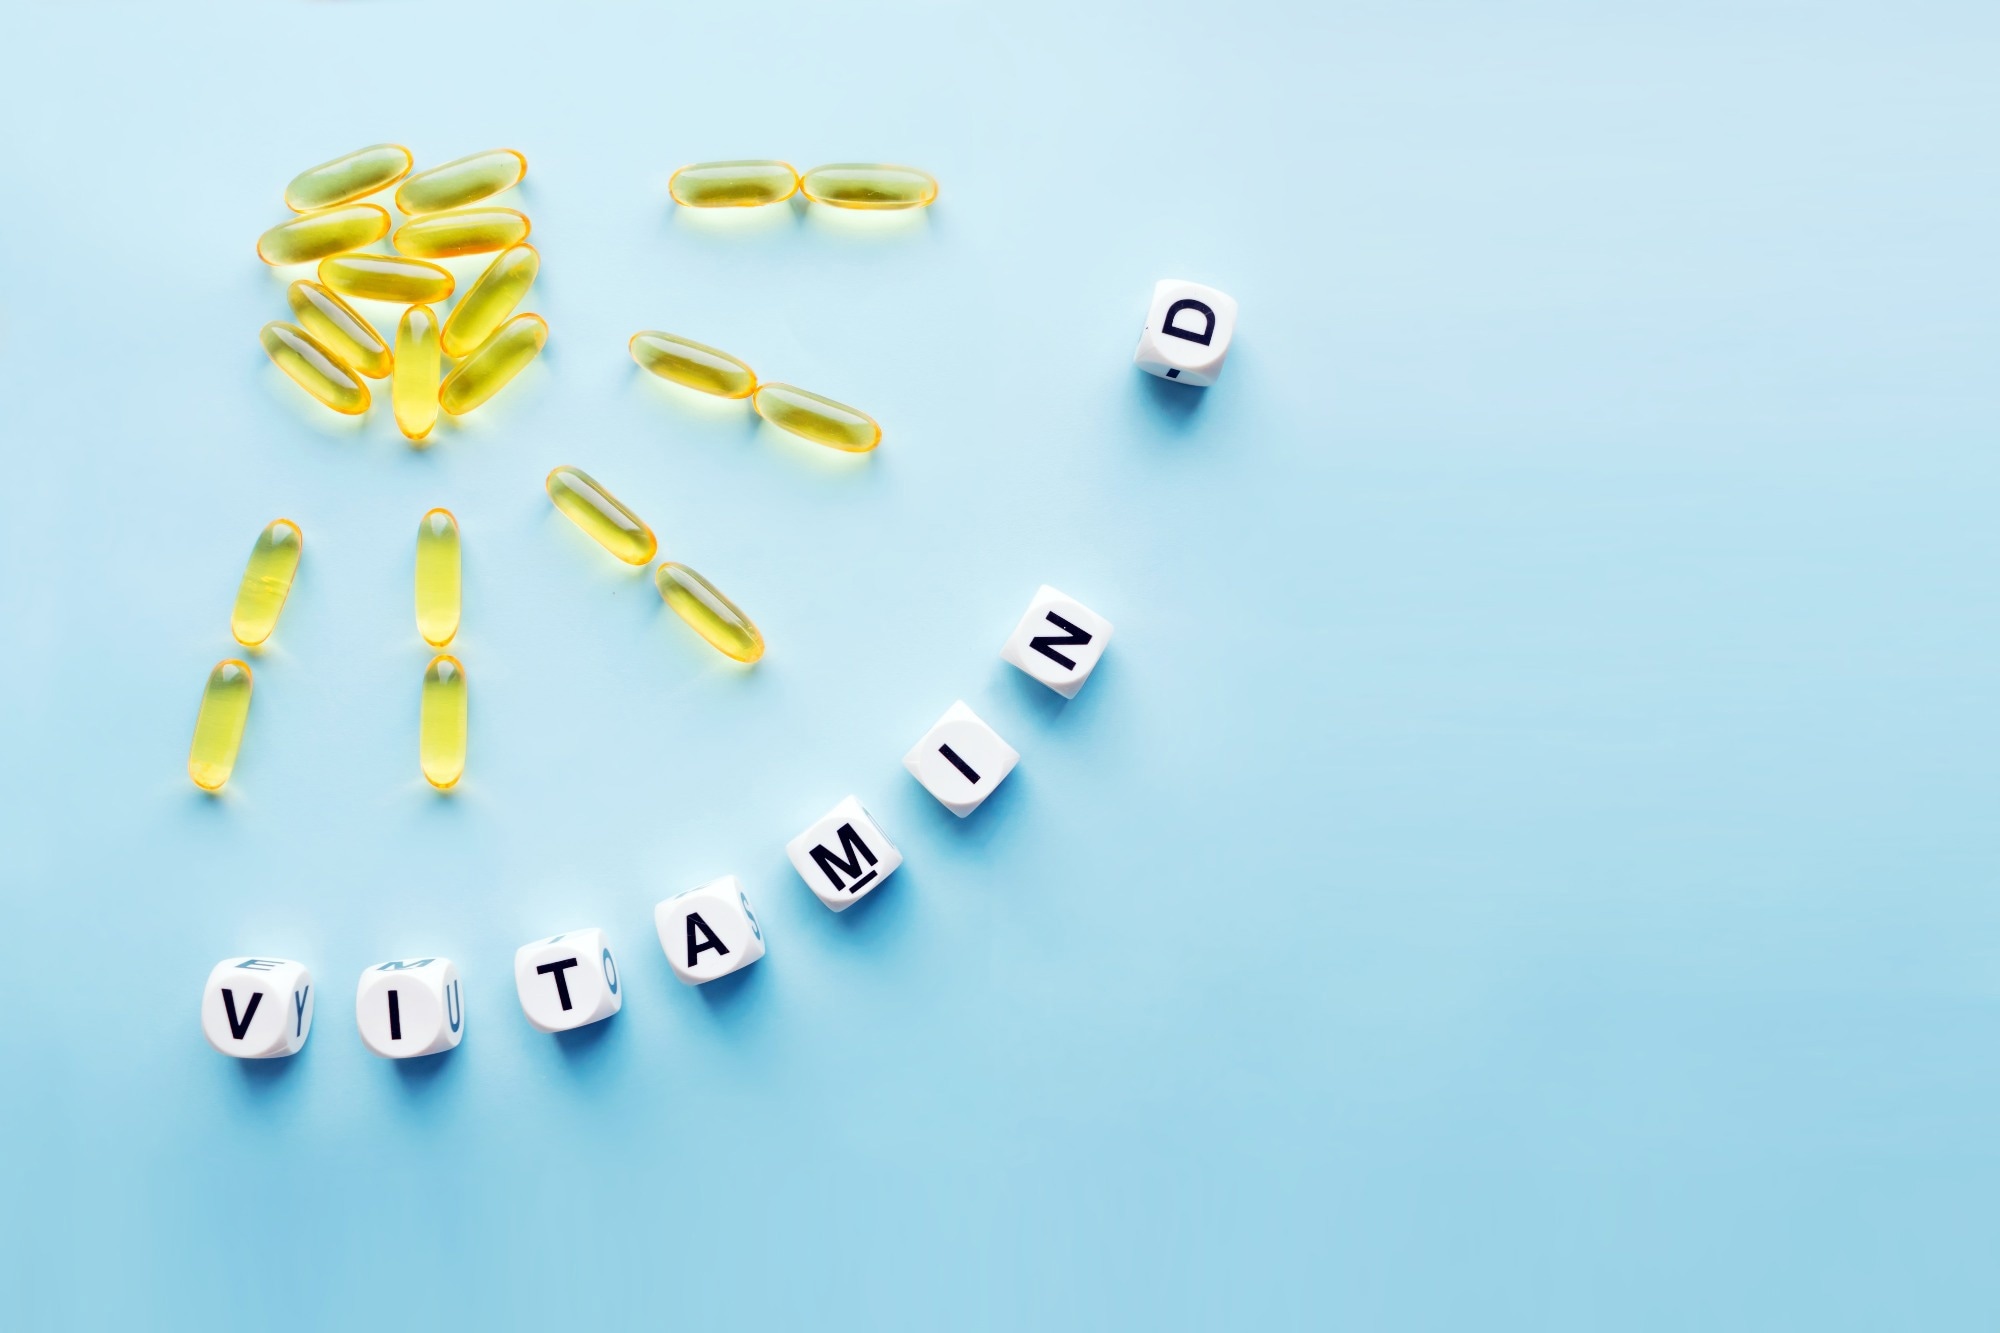 Study: Association of Body Weight With Response to Vitamin D Supplementation and Metabolism. Image Credit: Iryna Imago / Shutterstock